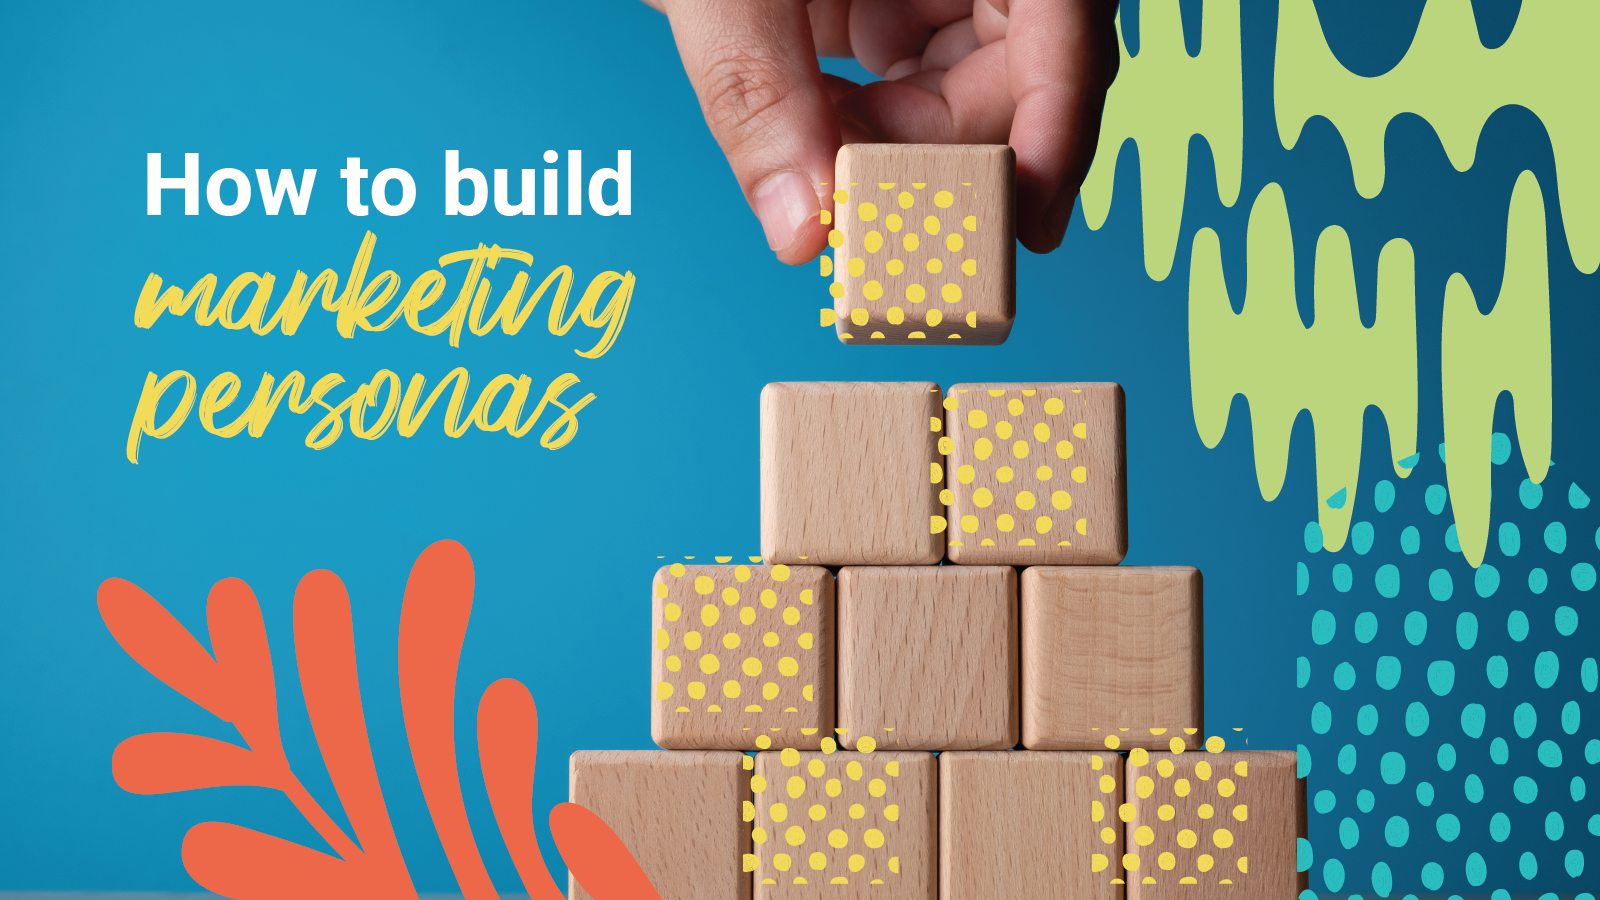 A hand stacking blocks with a blue background, surrounded by orange and green graphic elements, and the words "how to build marketing personas".